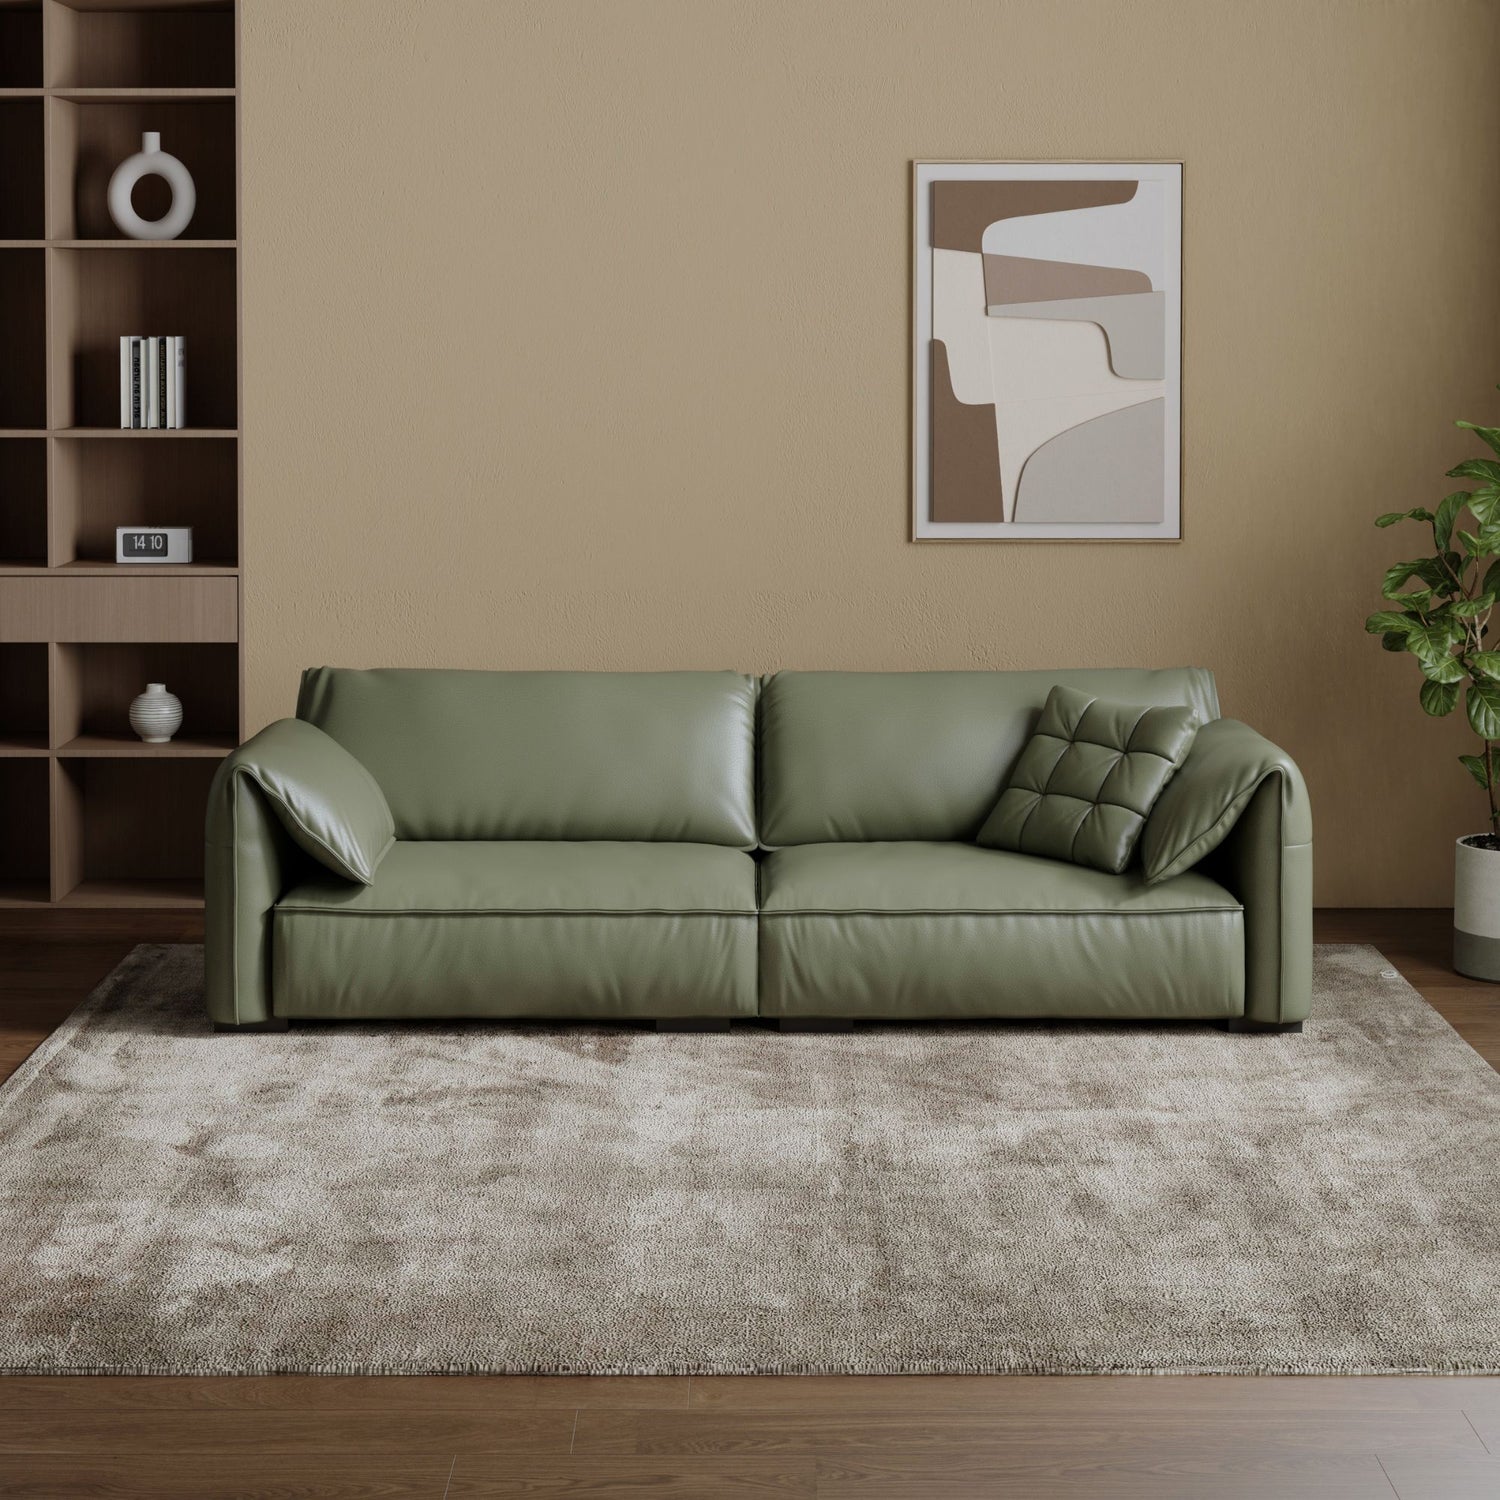 Comfy green top grain leather sofa in living room